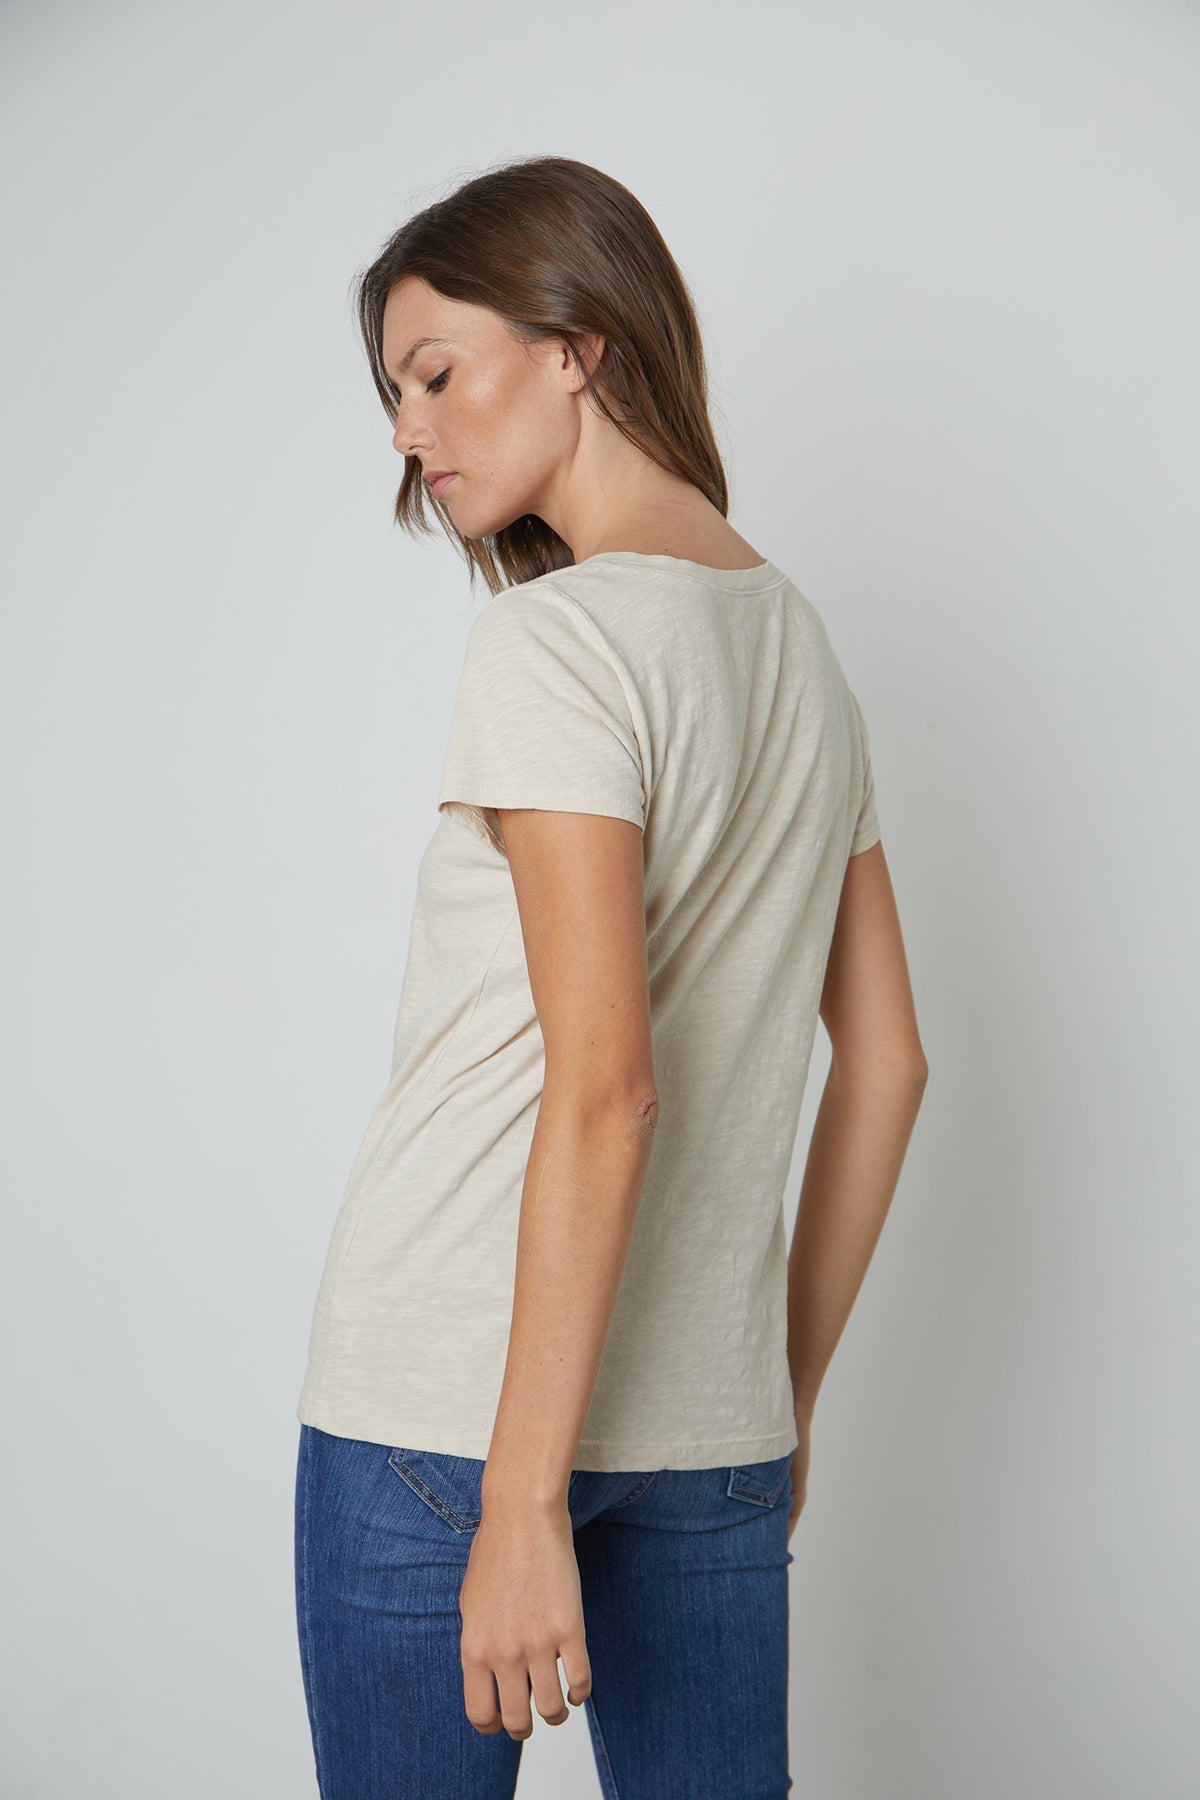 Lilith Tee in Bisque Back View-26630509953217